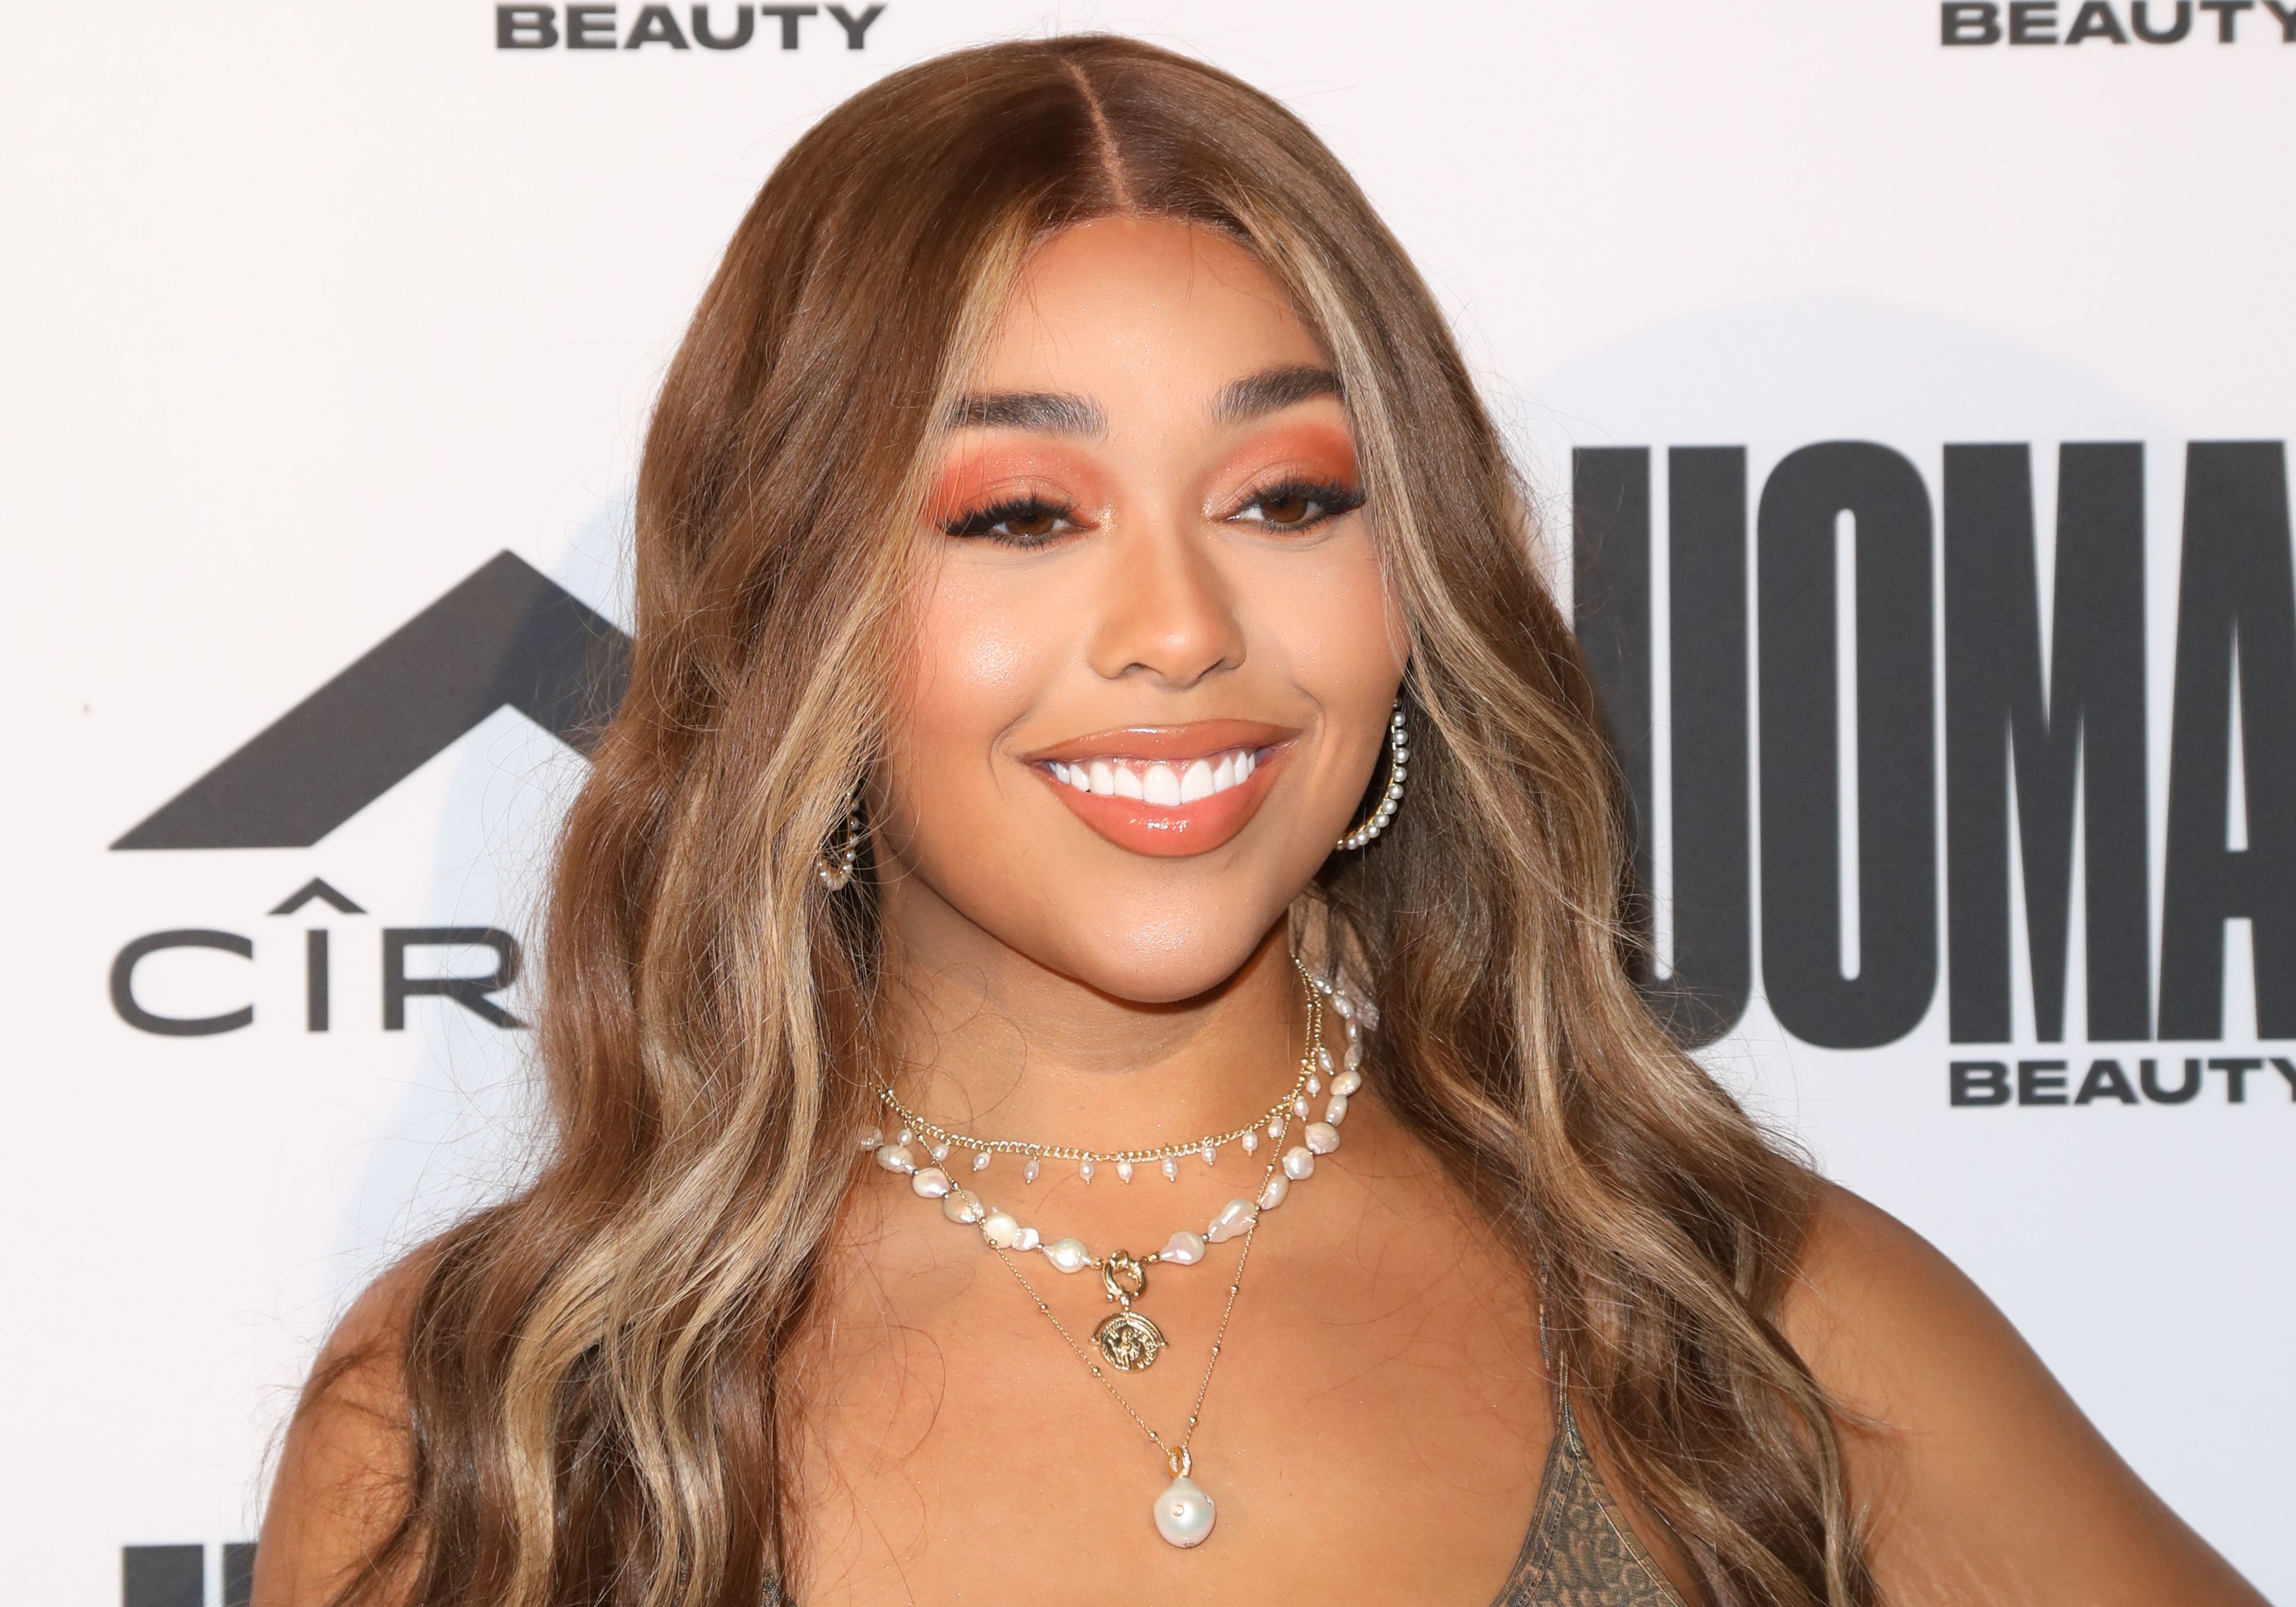 Jordyn Woods at the UOMA Summer House LA at a Private Residence on August 10, 2019. | Photo: Getty Images